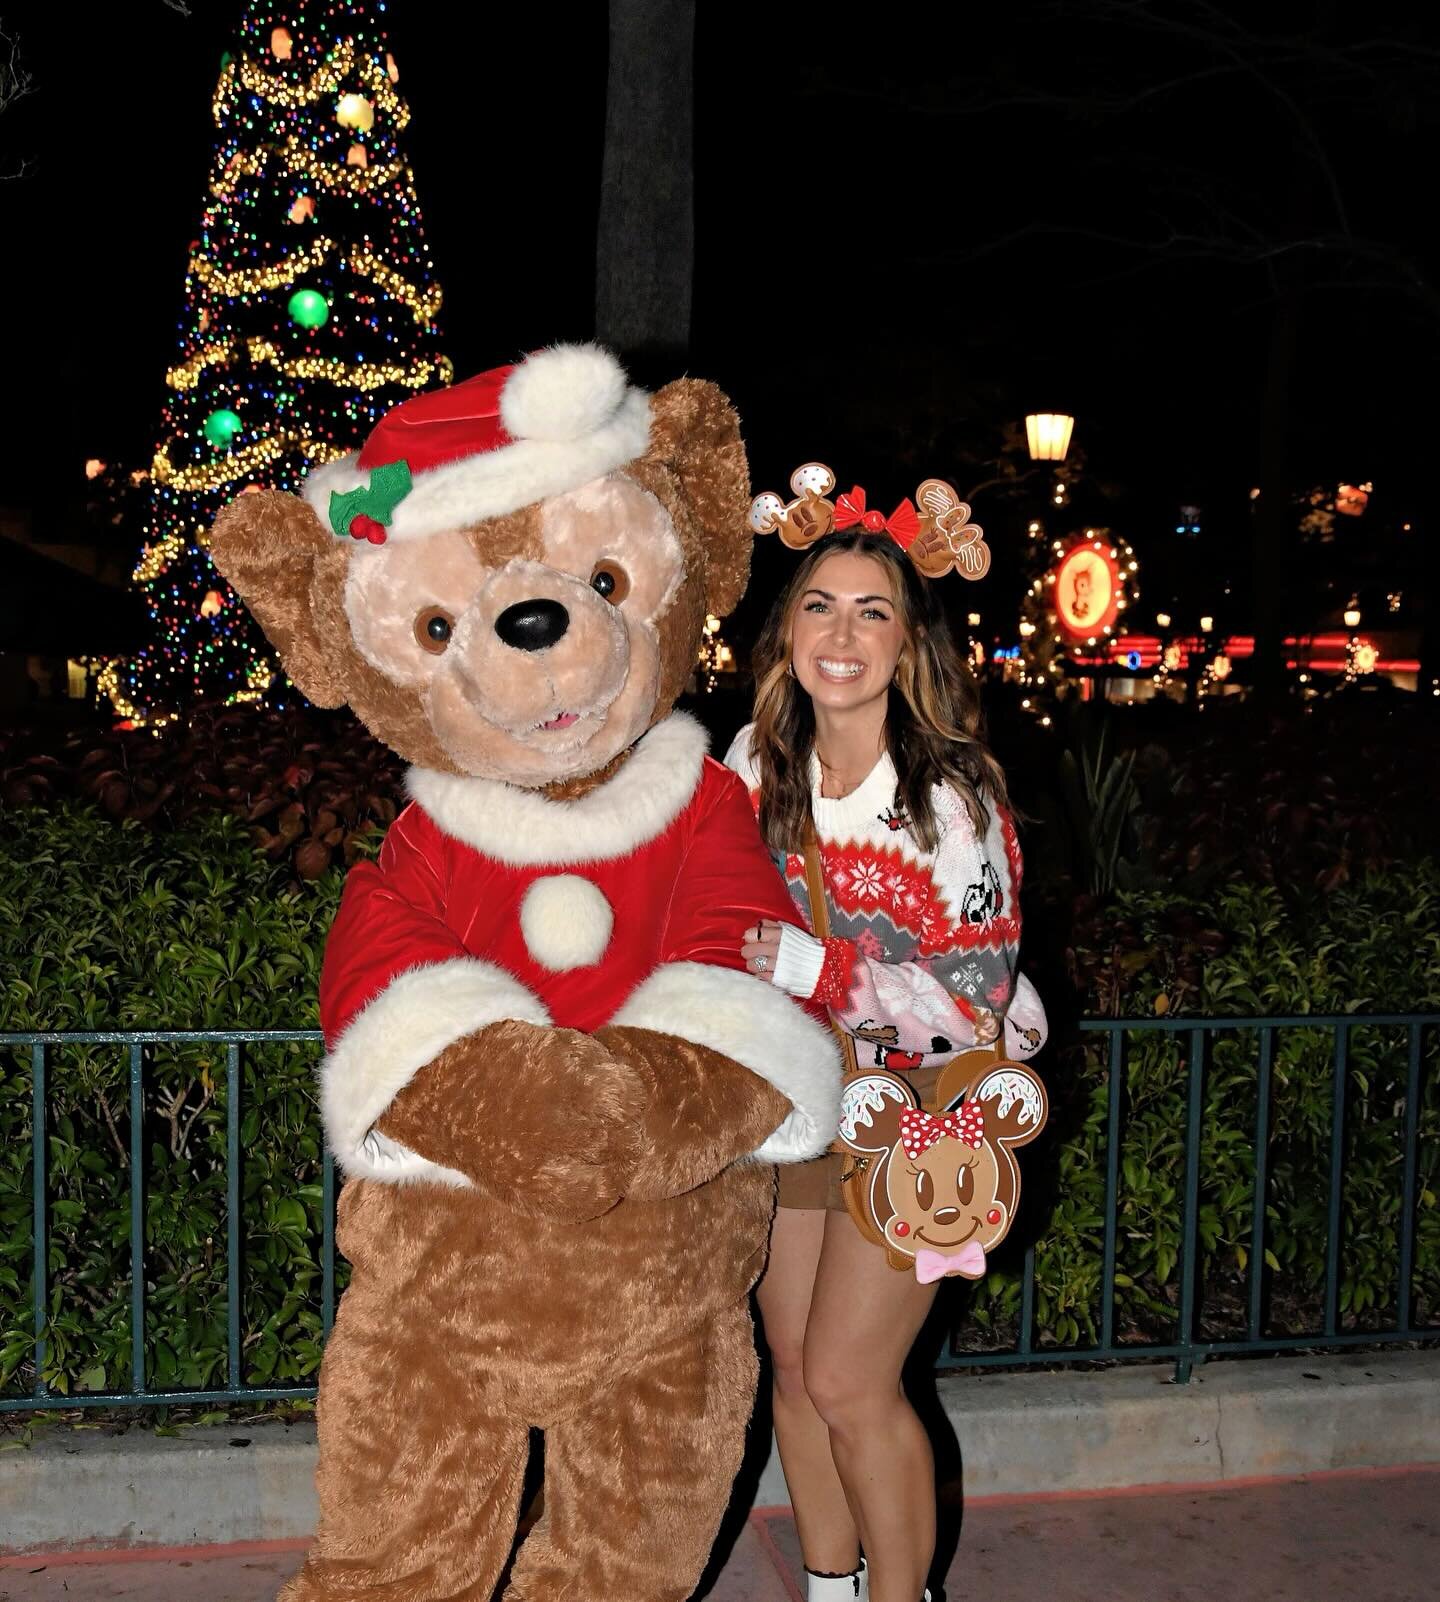 We wish you a Jolly Holiday 🎄

We ended our vacation on my birthday at Jollywood Nights at Hollywood Studios! 🎅🏼 I mean, the night started with us meeting Santa Duffy so it was obviously a great start 🐻

Food, drinks, characters, Christmas vibes,